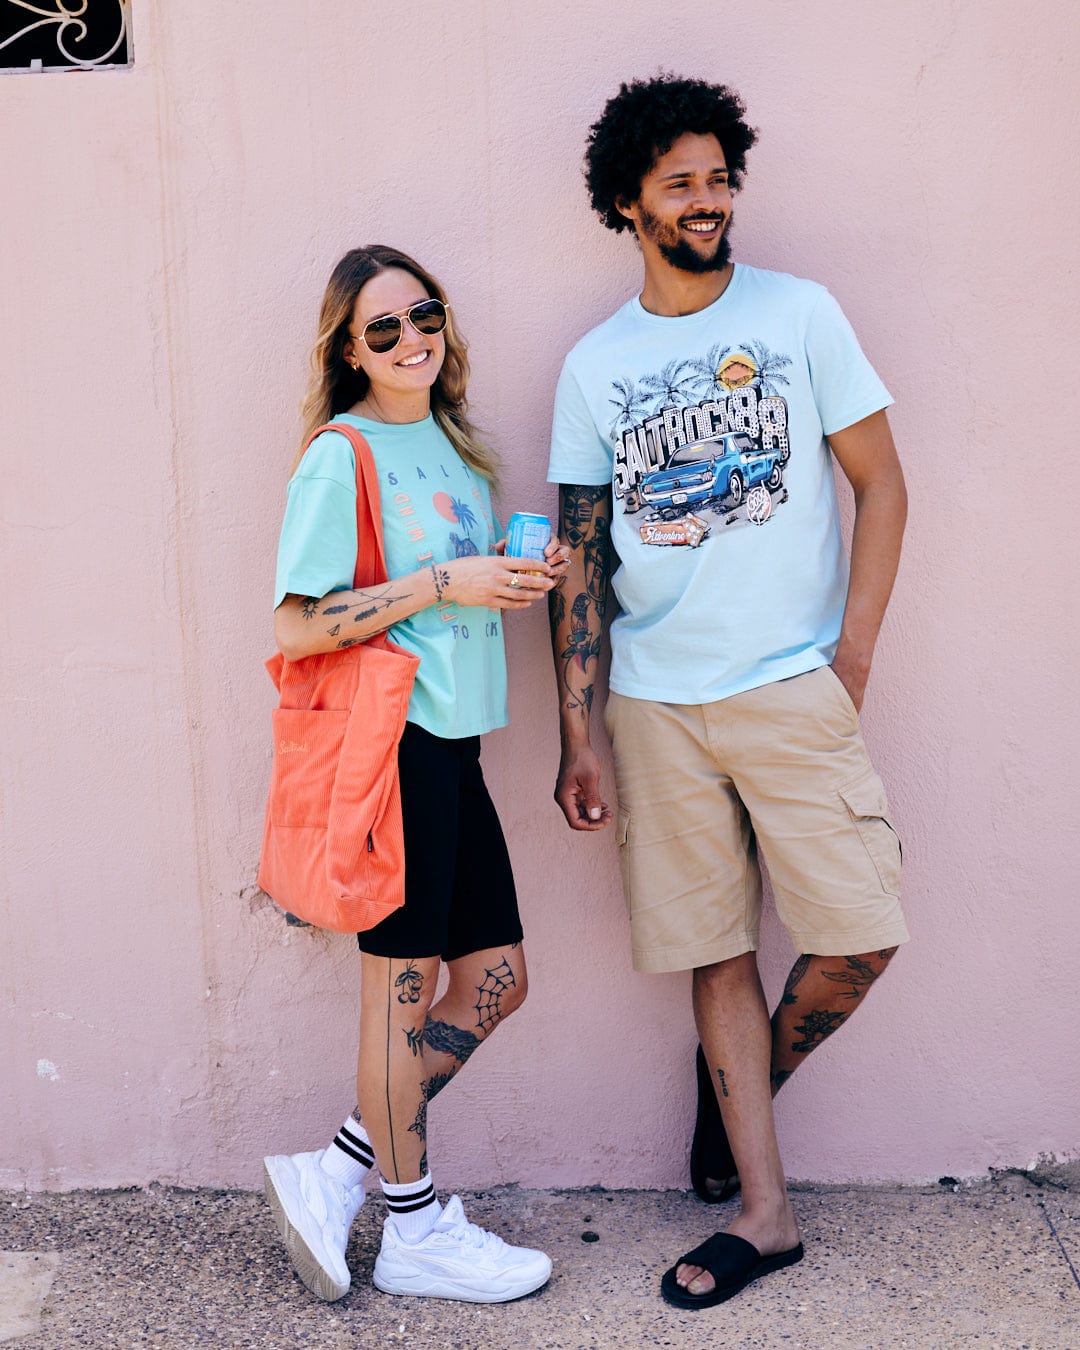 A man and woman smiling and standing against a pink wall, the woman holding a drink and a Neon Boneyard - Mens Short Sleeve T-Shirt - Light Blue tote bag made of 100% Cotton from Saltrock, and the man with a cup and phone. Both are casually.